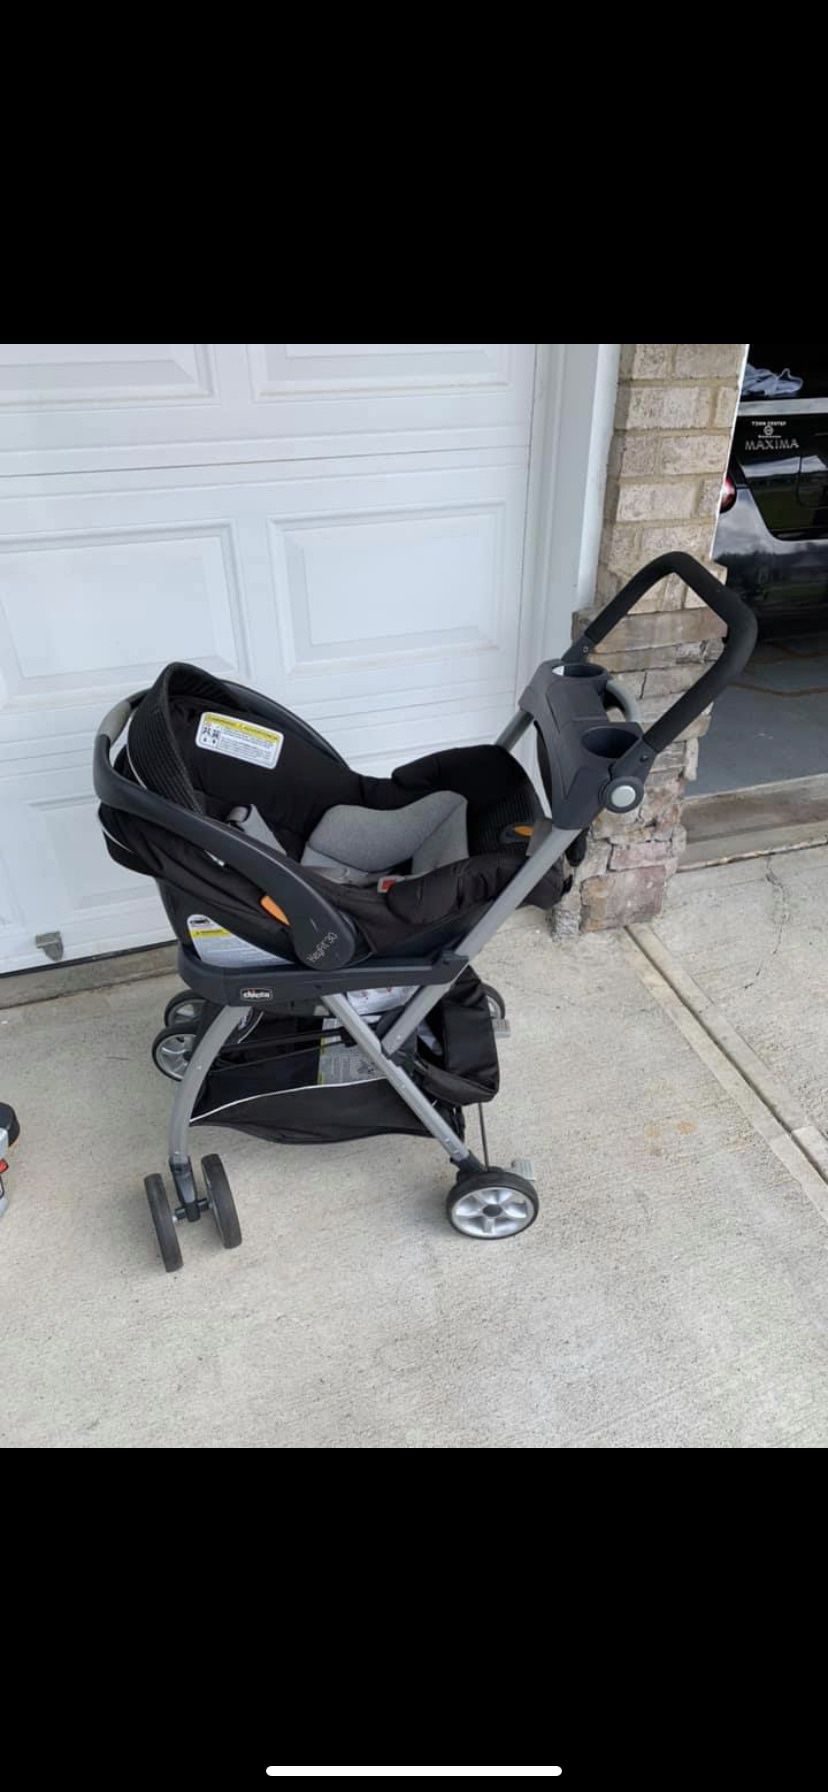 Chicco Keyfit 30 stroller, carrier and base